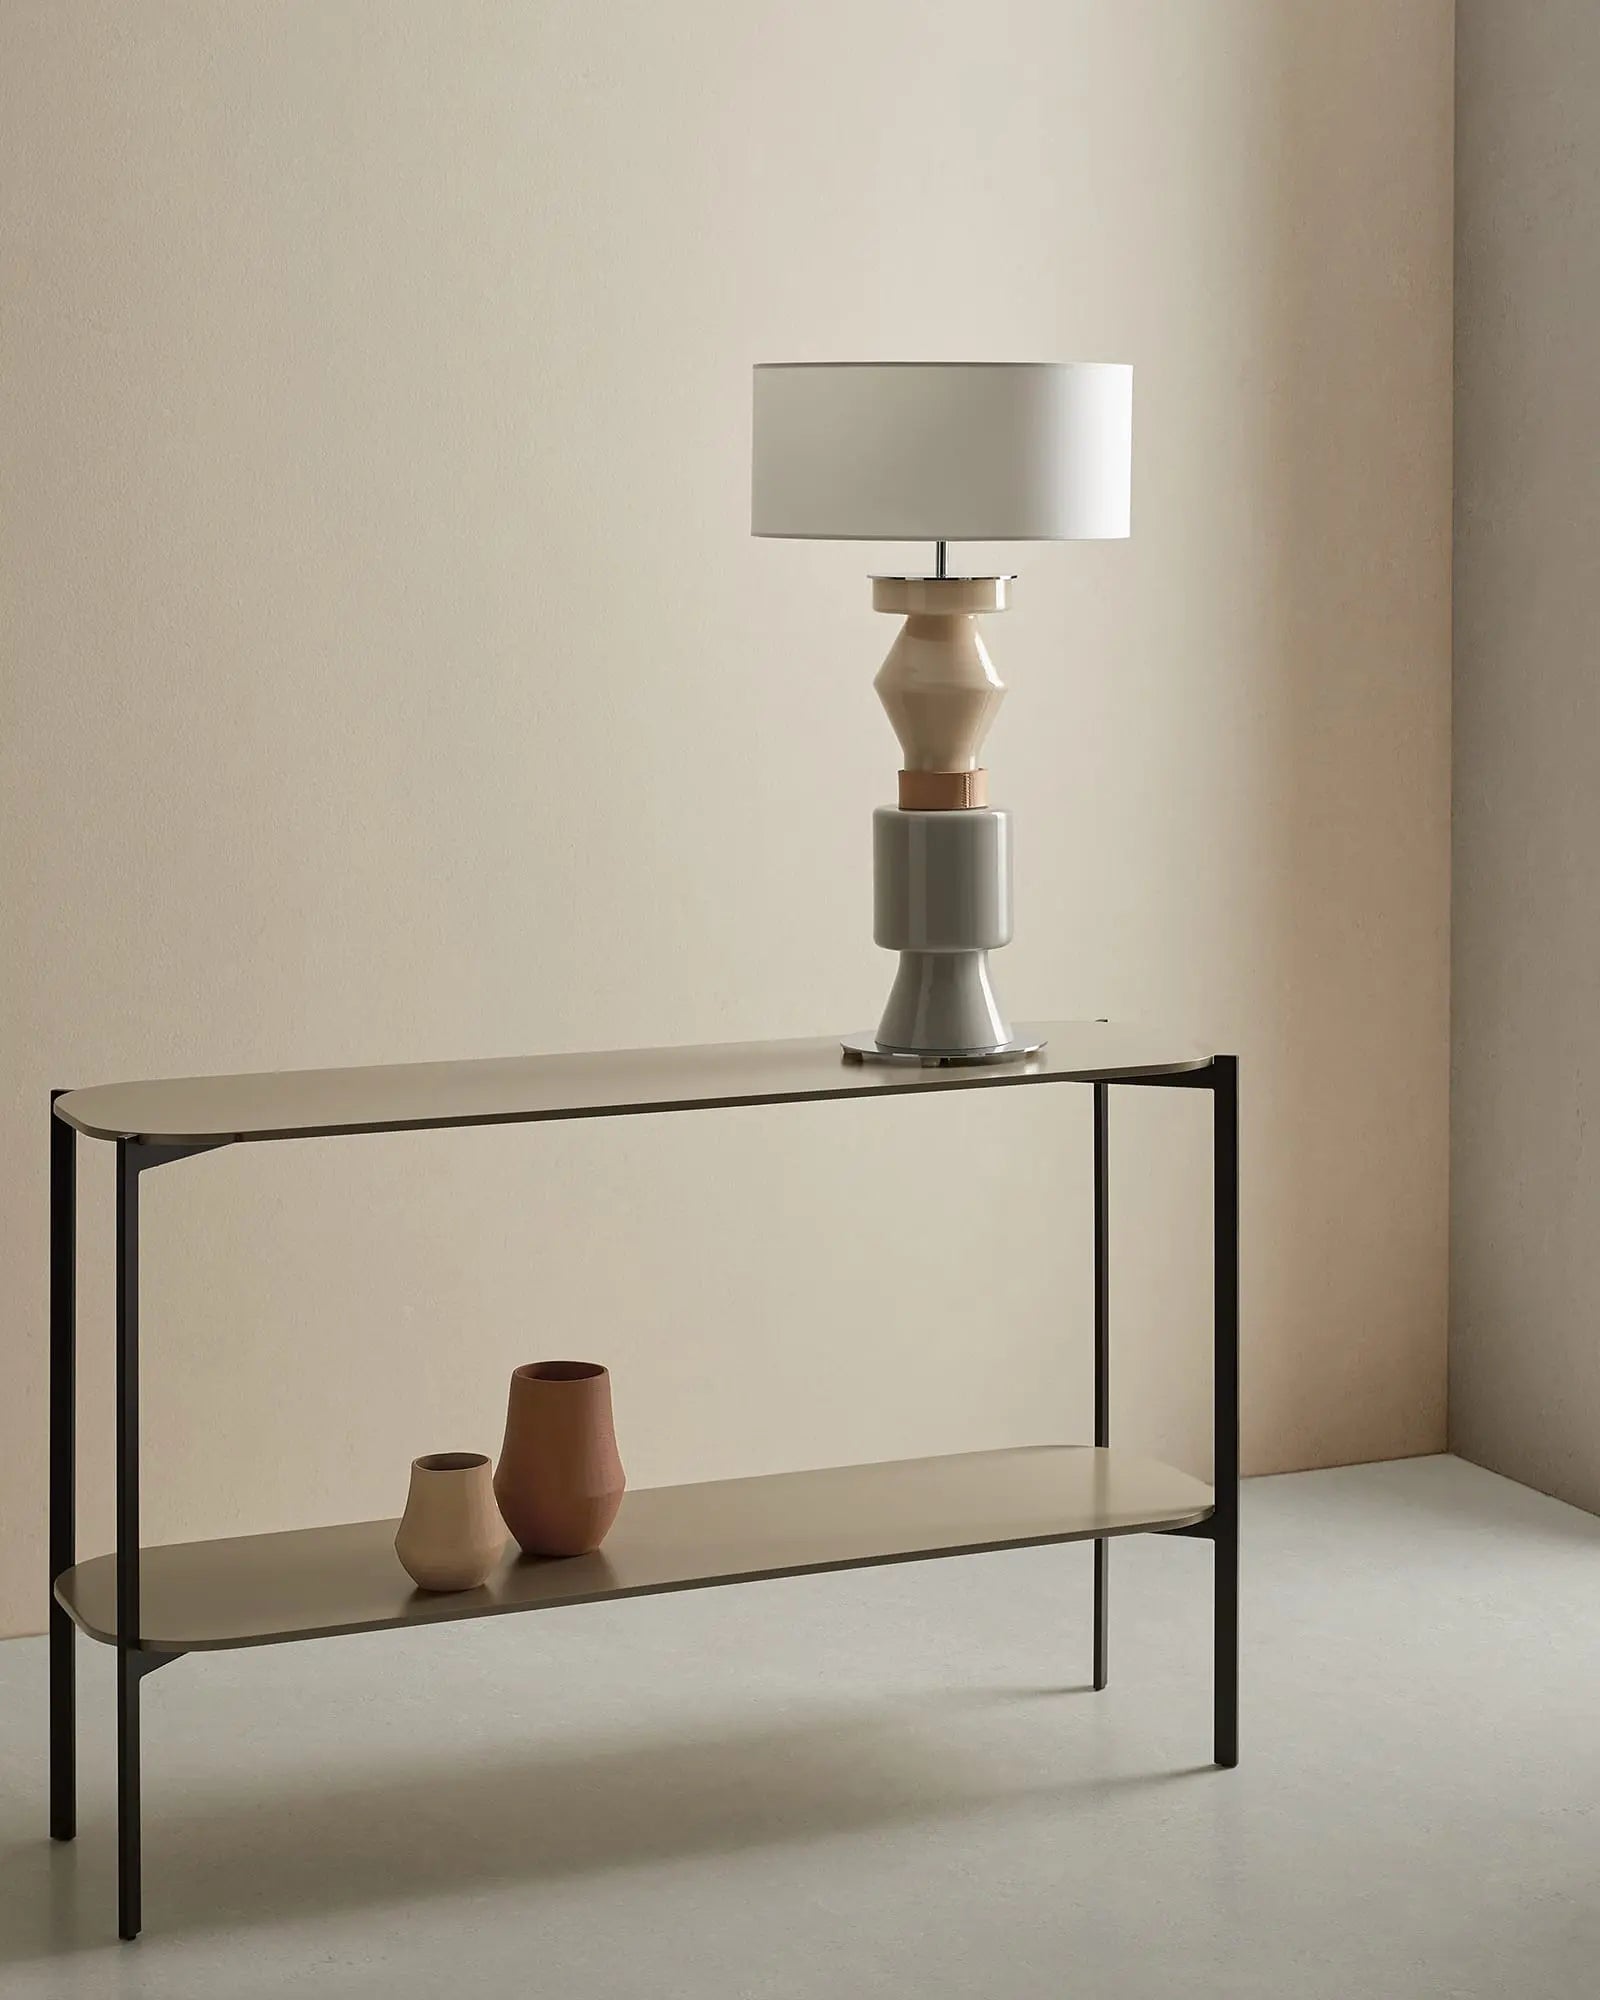 Kitta Ponn contemporary decorative table lamp in ceramic and fabric shade in living room over a bench